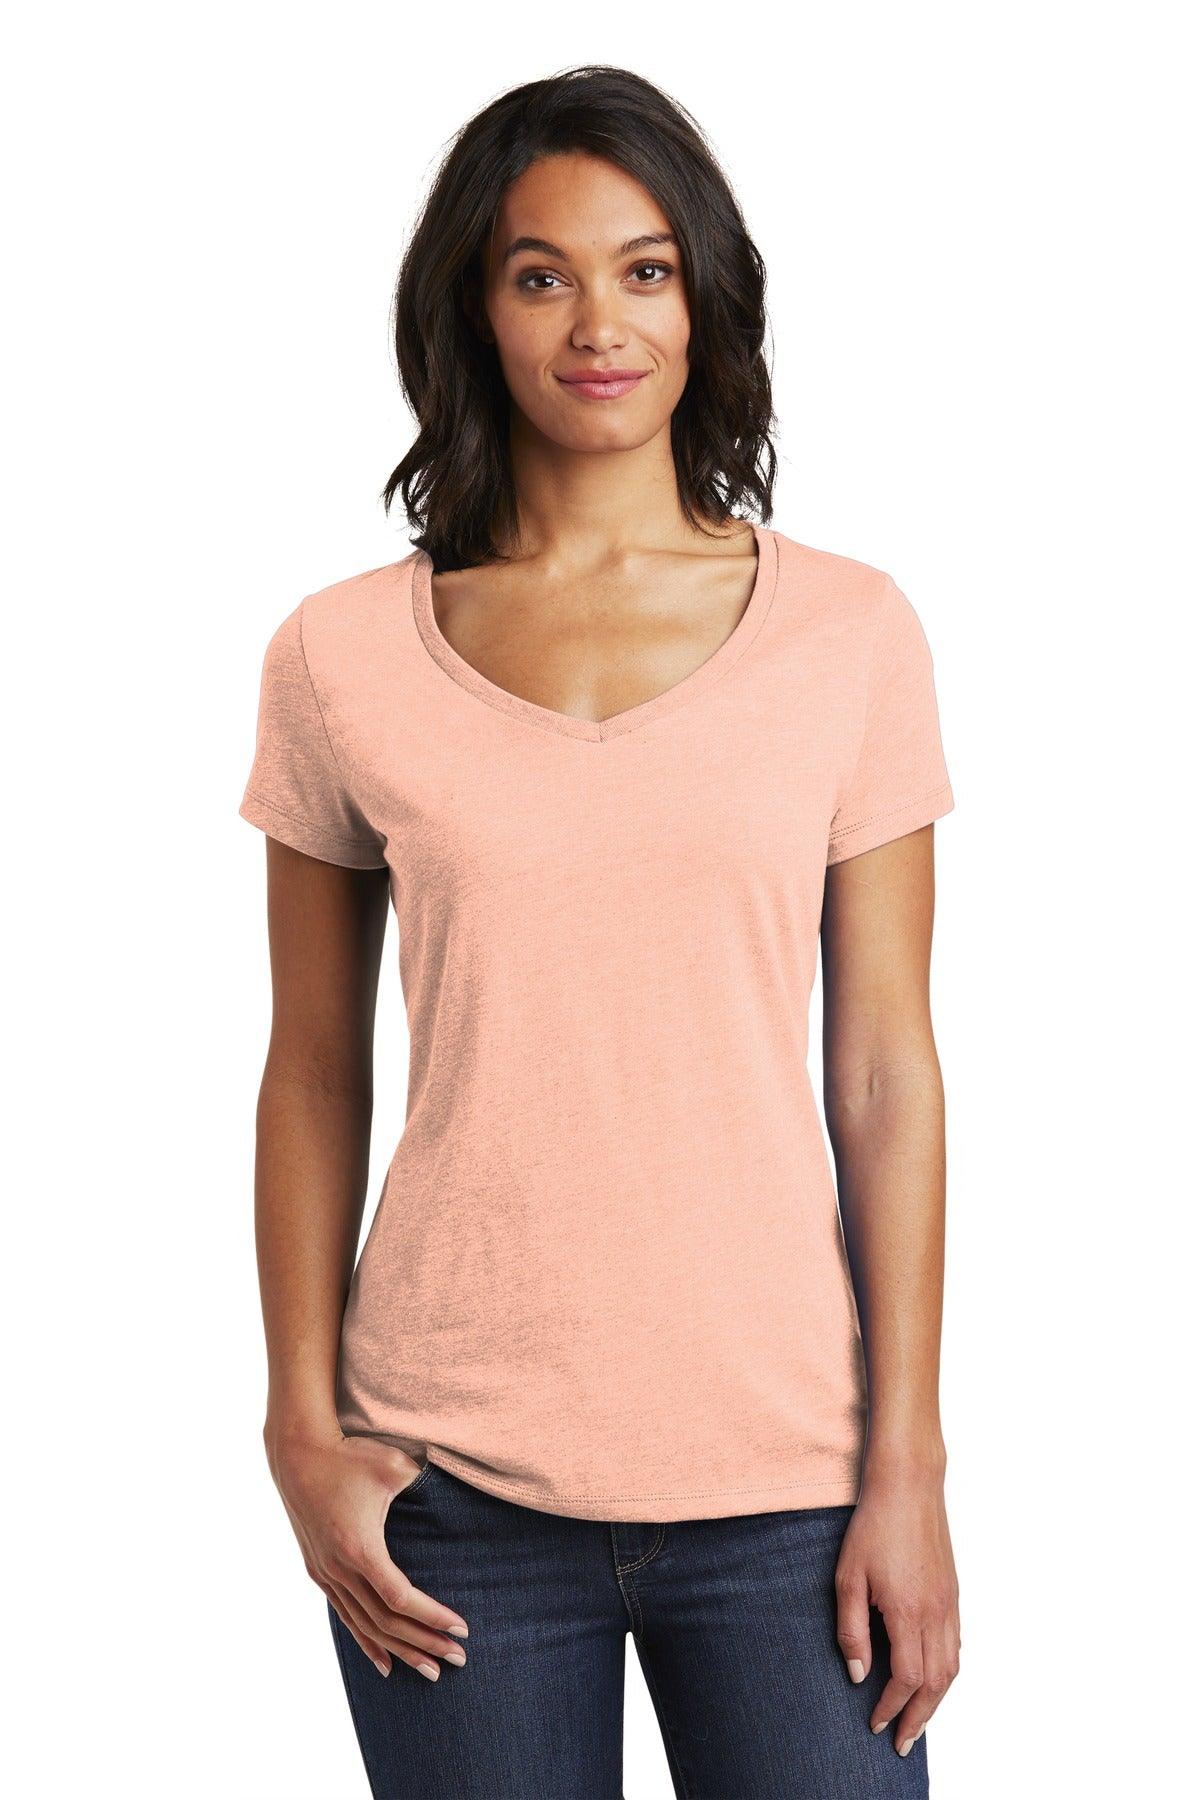 District Women's Very Important Tee V-Neck. DT6503 - Dresses Max